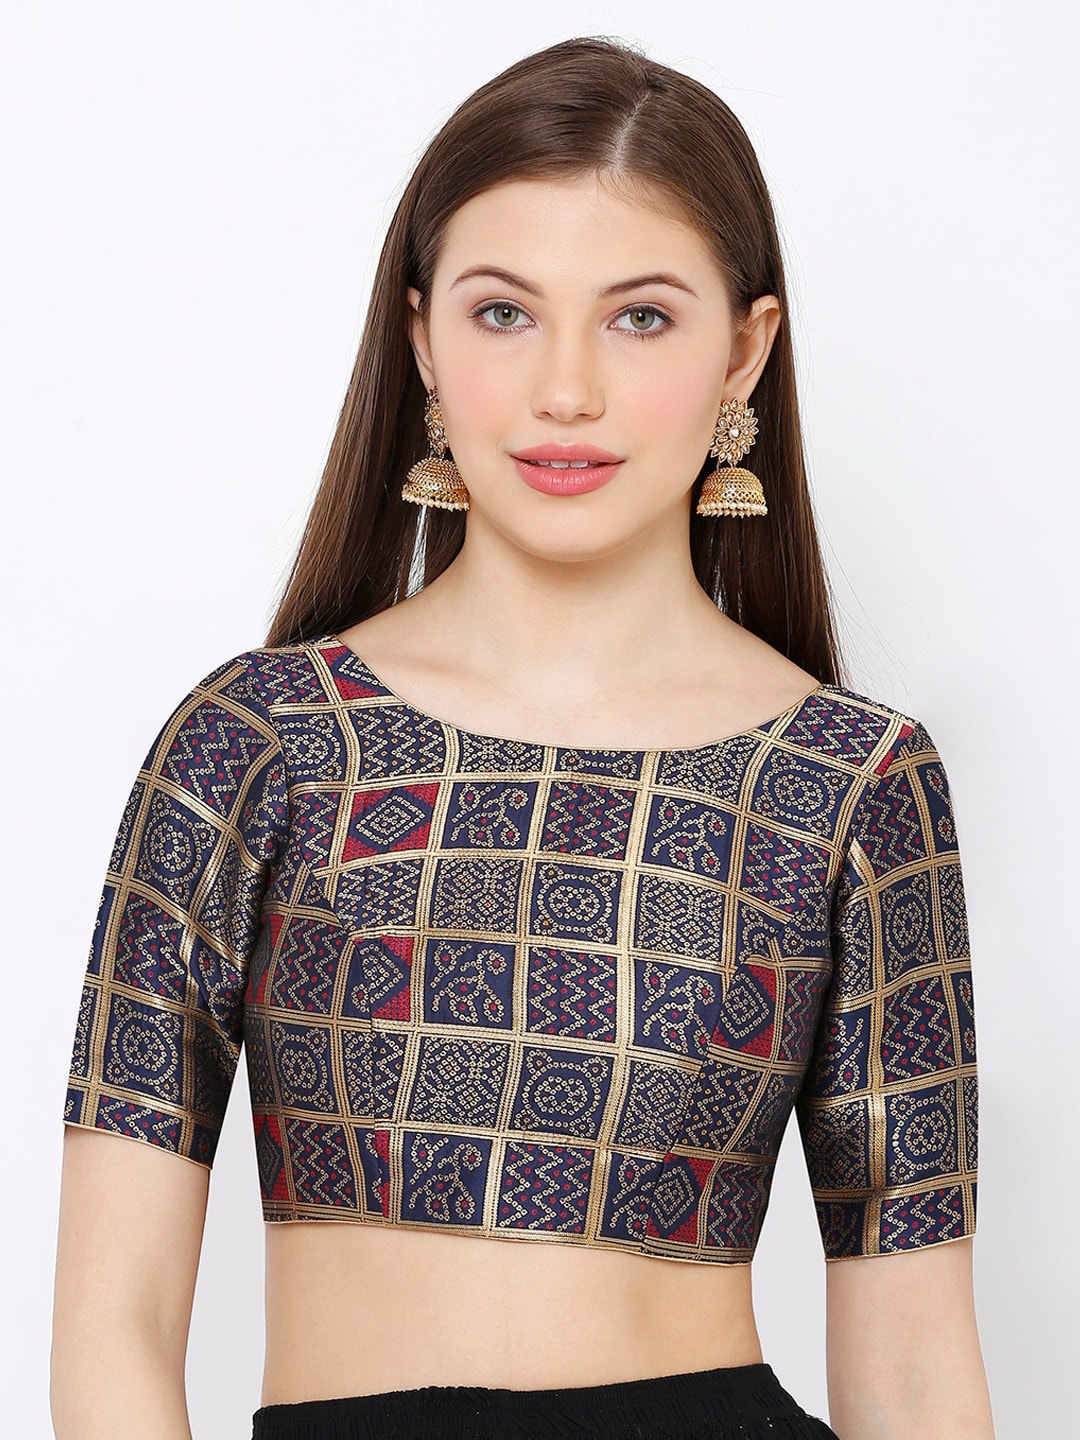 SALWAR STUDIO Women Navy Blue & Gold-Colored Woven Design Readymade Saree Blouse Price in India